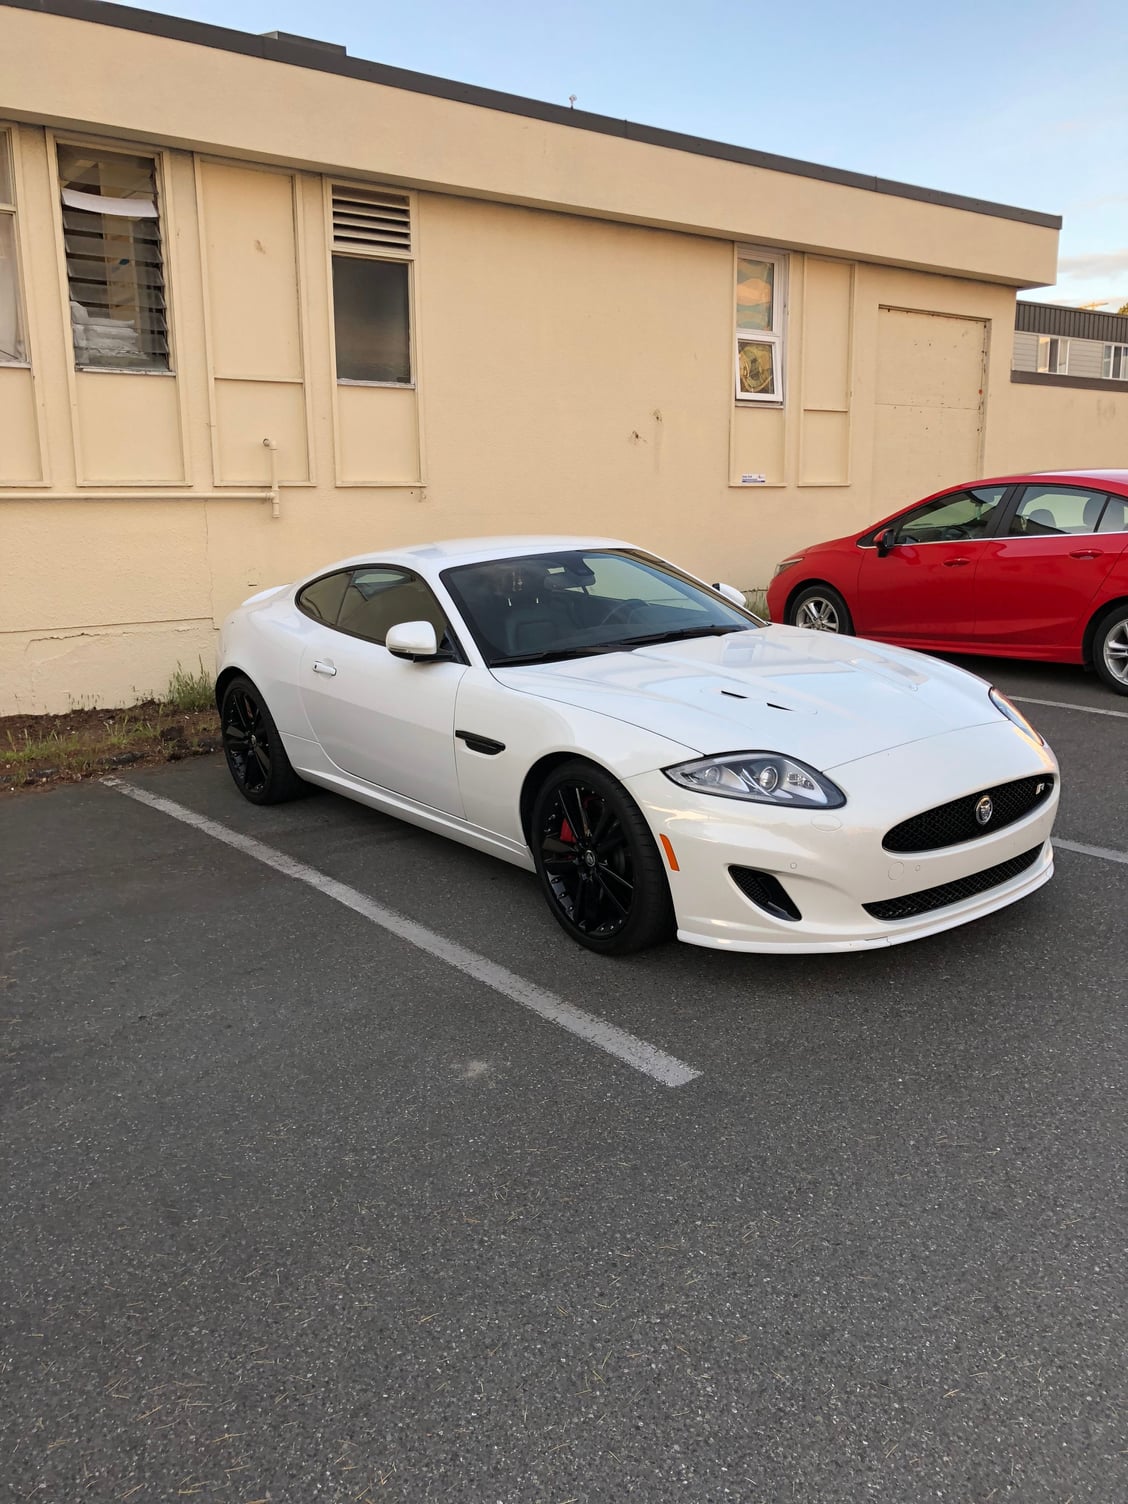 2013 Jaguar XKR - Mint 2013 XKR Canadian 16km only - Used - VIN SAJXA4DC0DMB50295 - 16,000 Miles - 8 cyl - 2WD - Automatic - Coupe - White - Victoria, BC V8W4A4, Canada